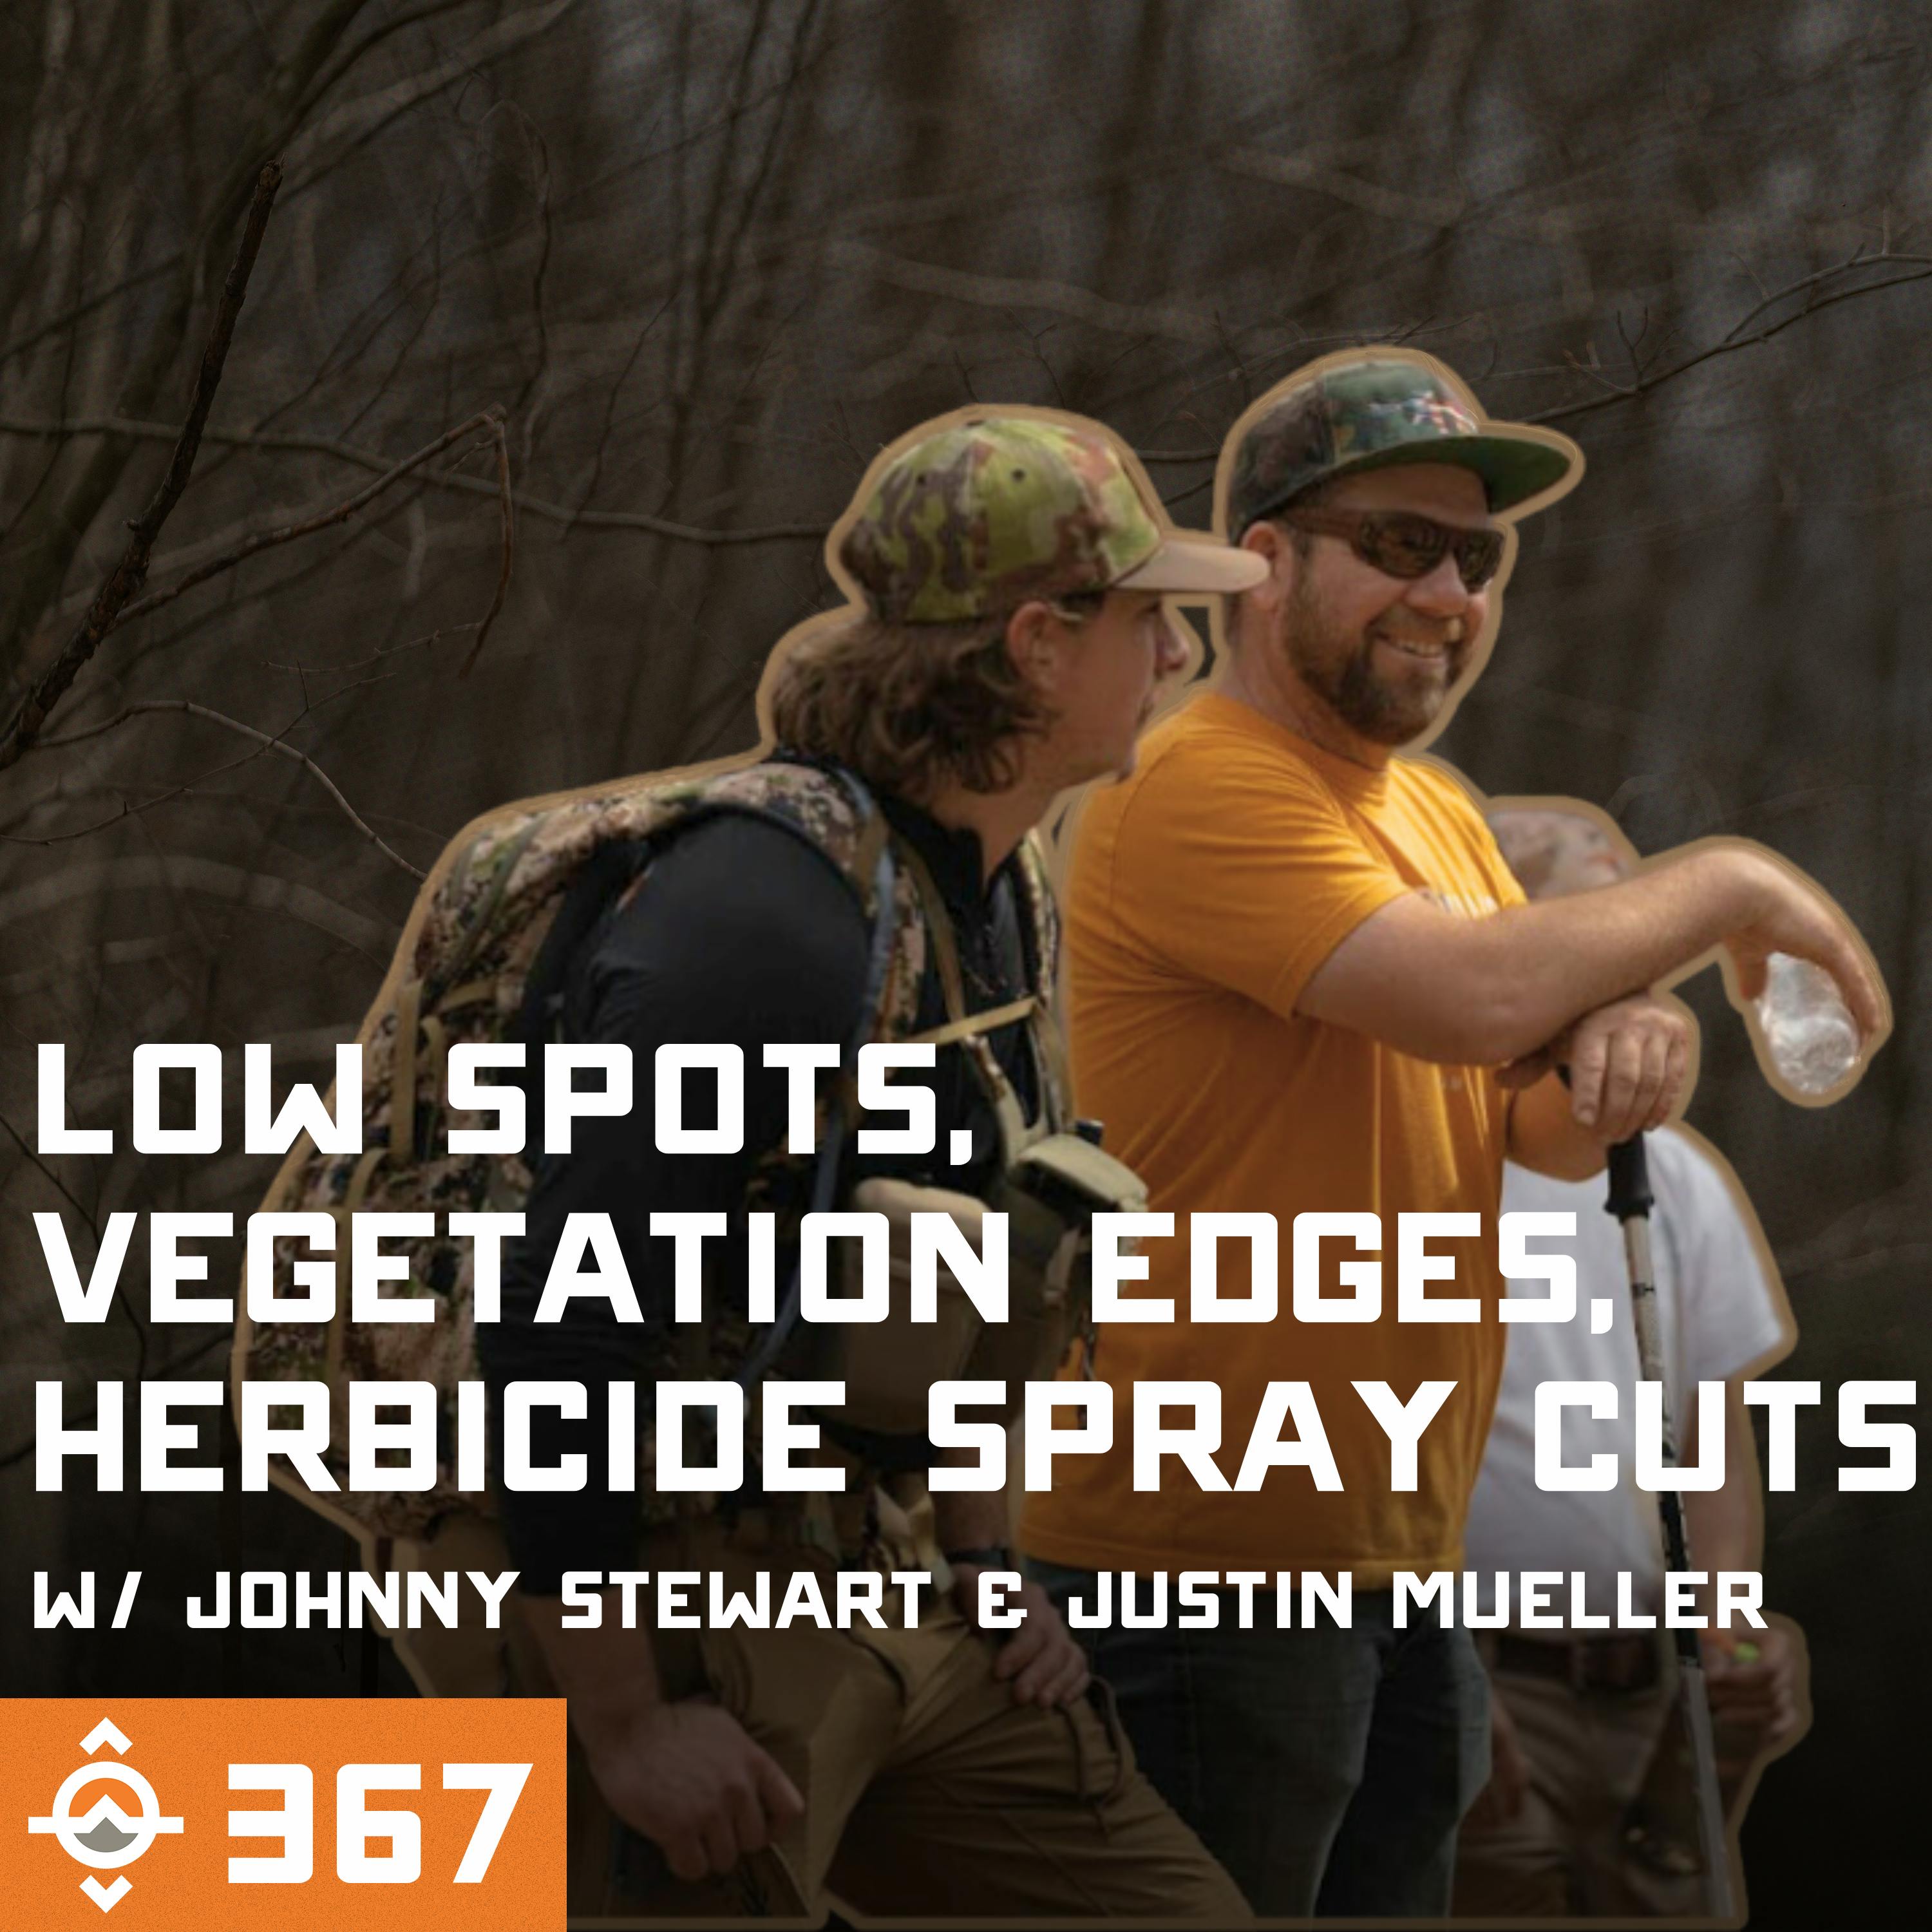 Ep. 367: Low Spots, Vegetation Edges, & Herbicide Spray Timber Cuts in Flat Big Woods with Johnny Stewart and Justin Mueller